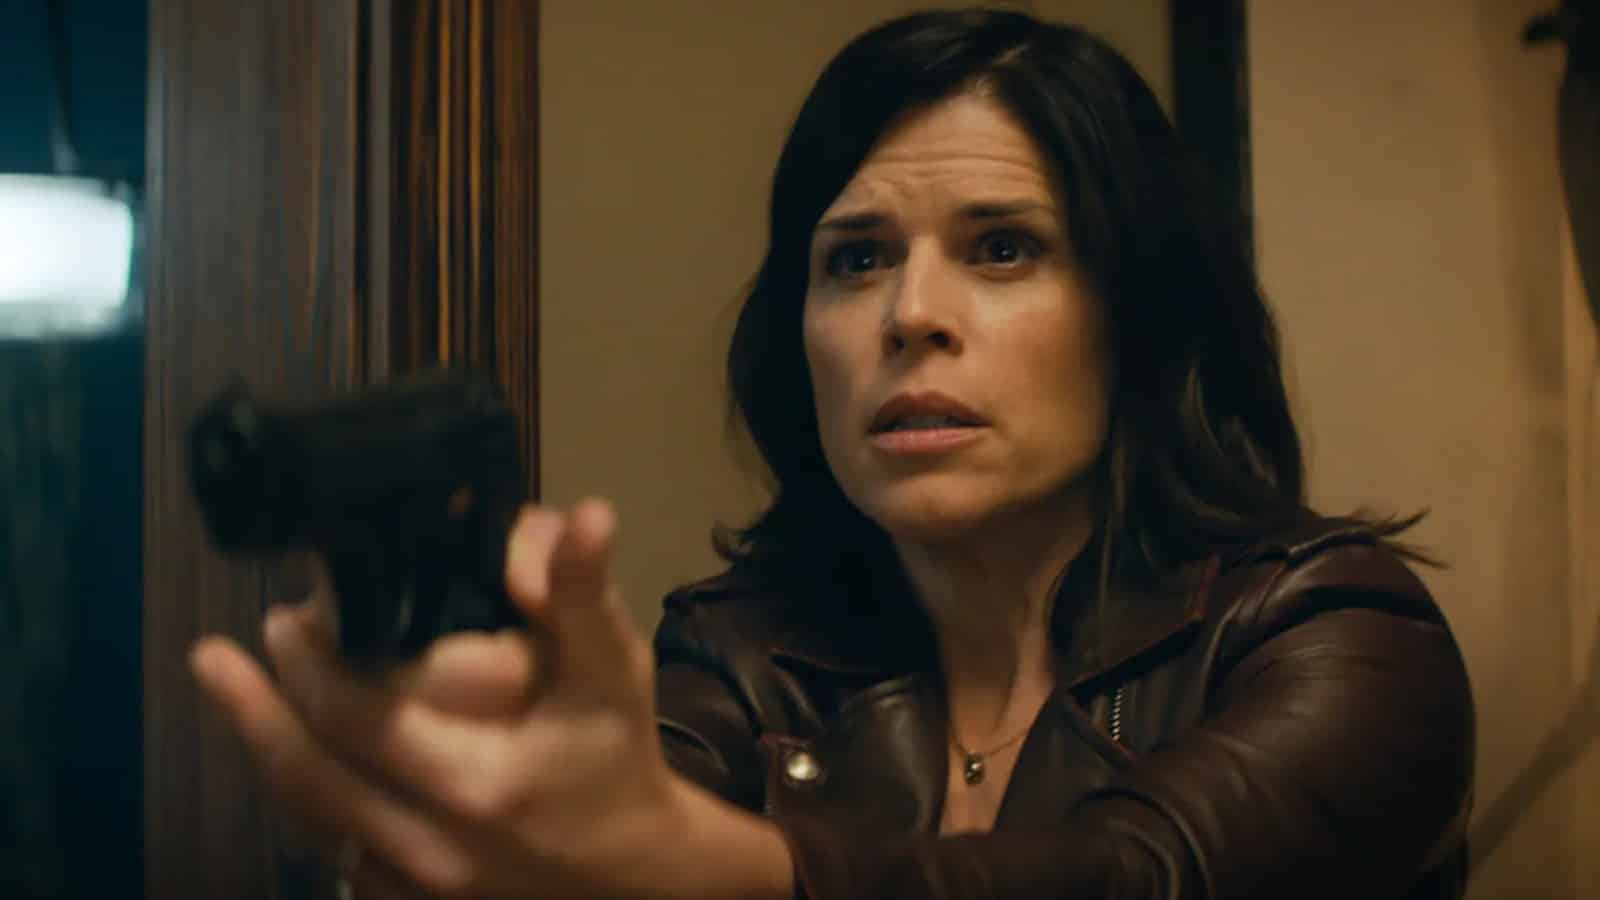 Neve Campbell as Sidney Prescott in Scream, who won't be returning for Scream 6.